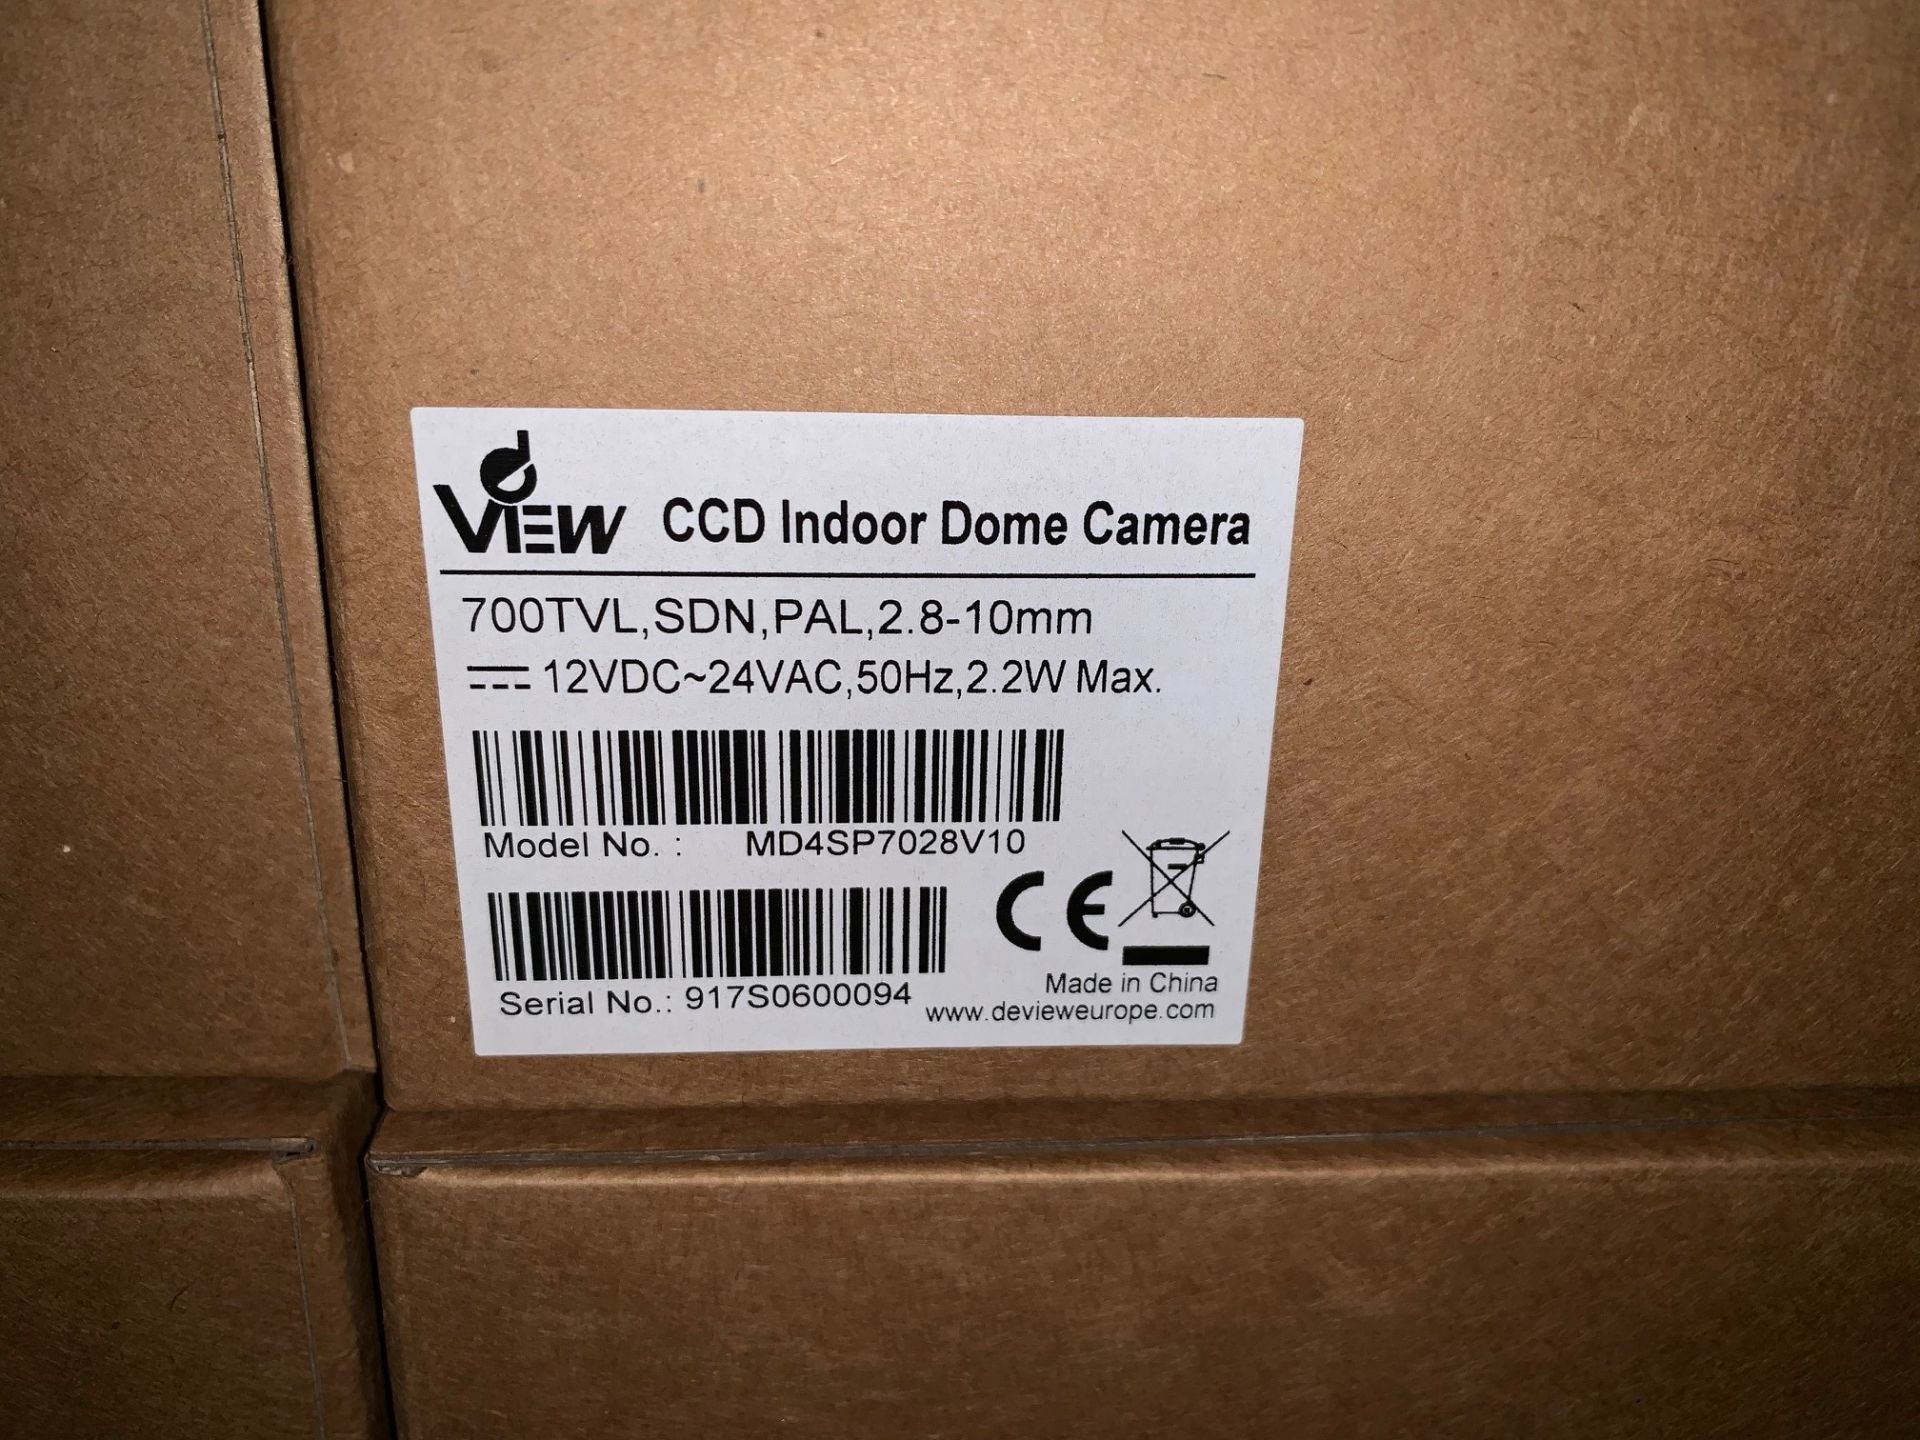 4 x dView CCD Indoor Dome Cameras - 700TVL, SDN, PAL, 2.8-10mm - Model MD4SP7028V10 (Brand New & - Image 2 of 3